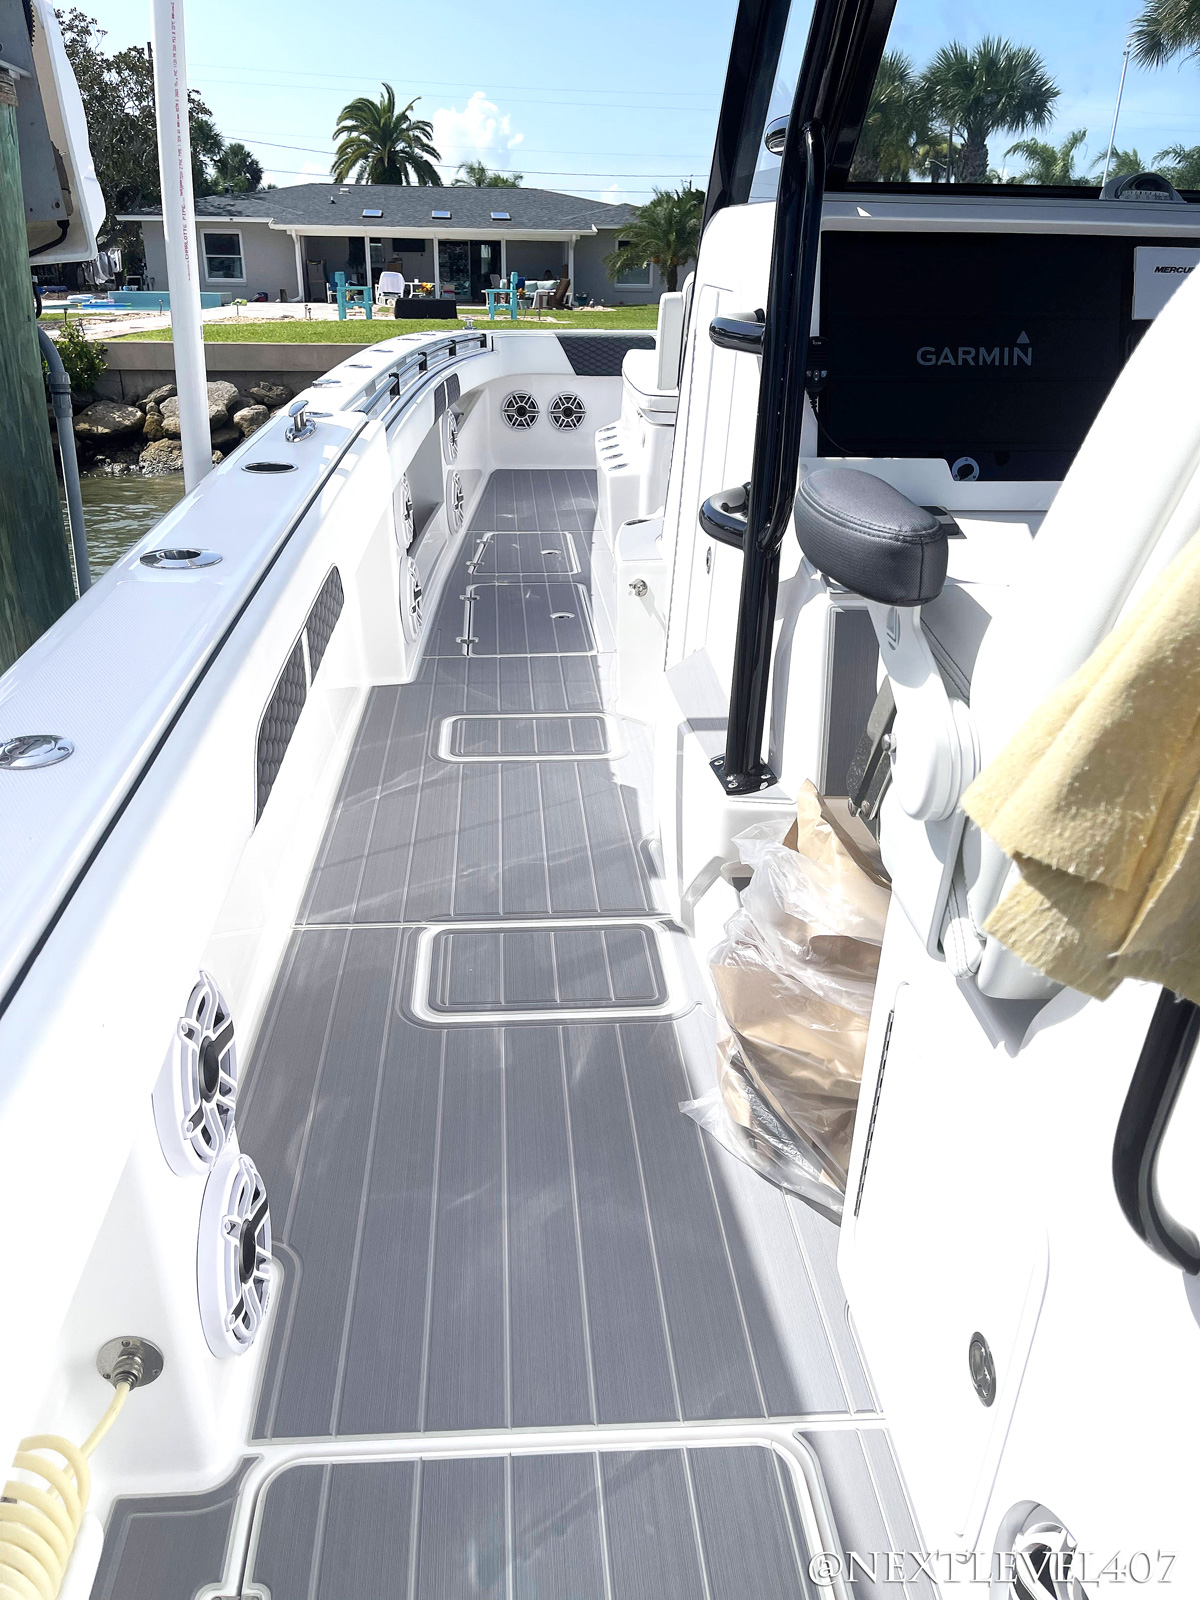 AFTER-Blue-Invincible-Boat-Custom-SeaDek-Marine-Flooring -Pad-Upgraded-Speakers-Full-On-Water-Walk-Path-Front-To-Back-Grey-Center-Console- Fishing-Pole-Holder-2 – Florida Marine Customs